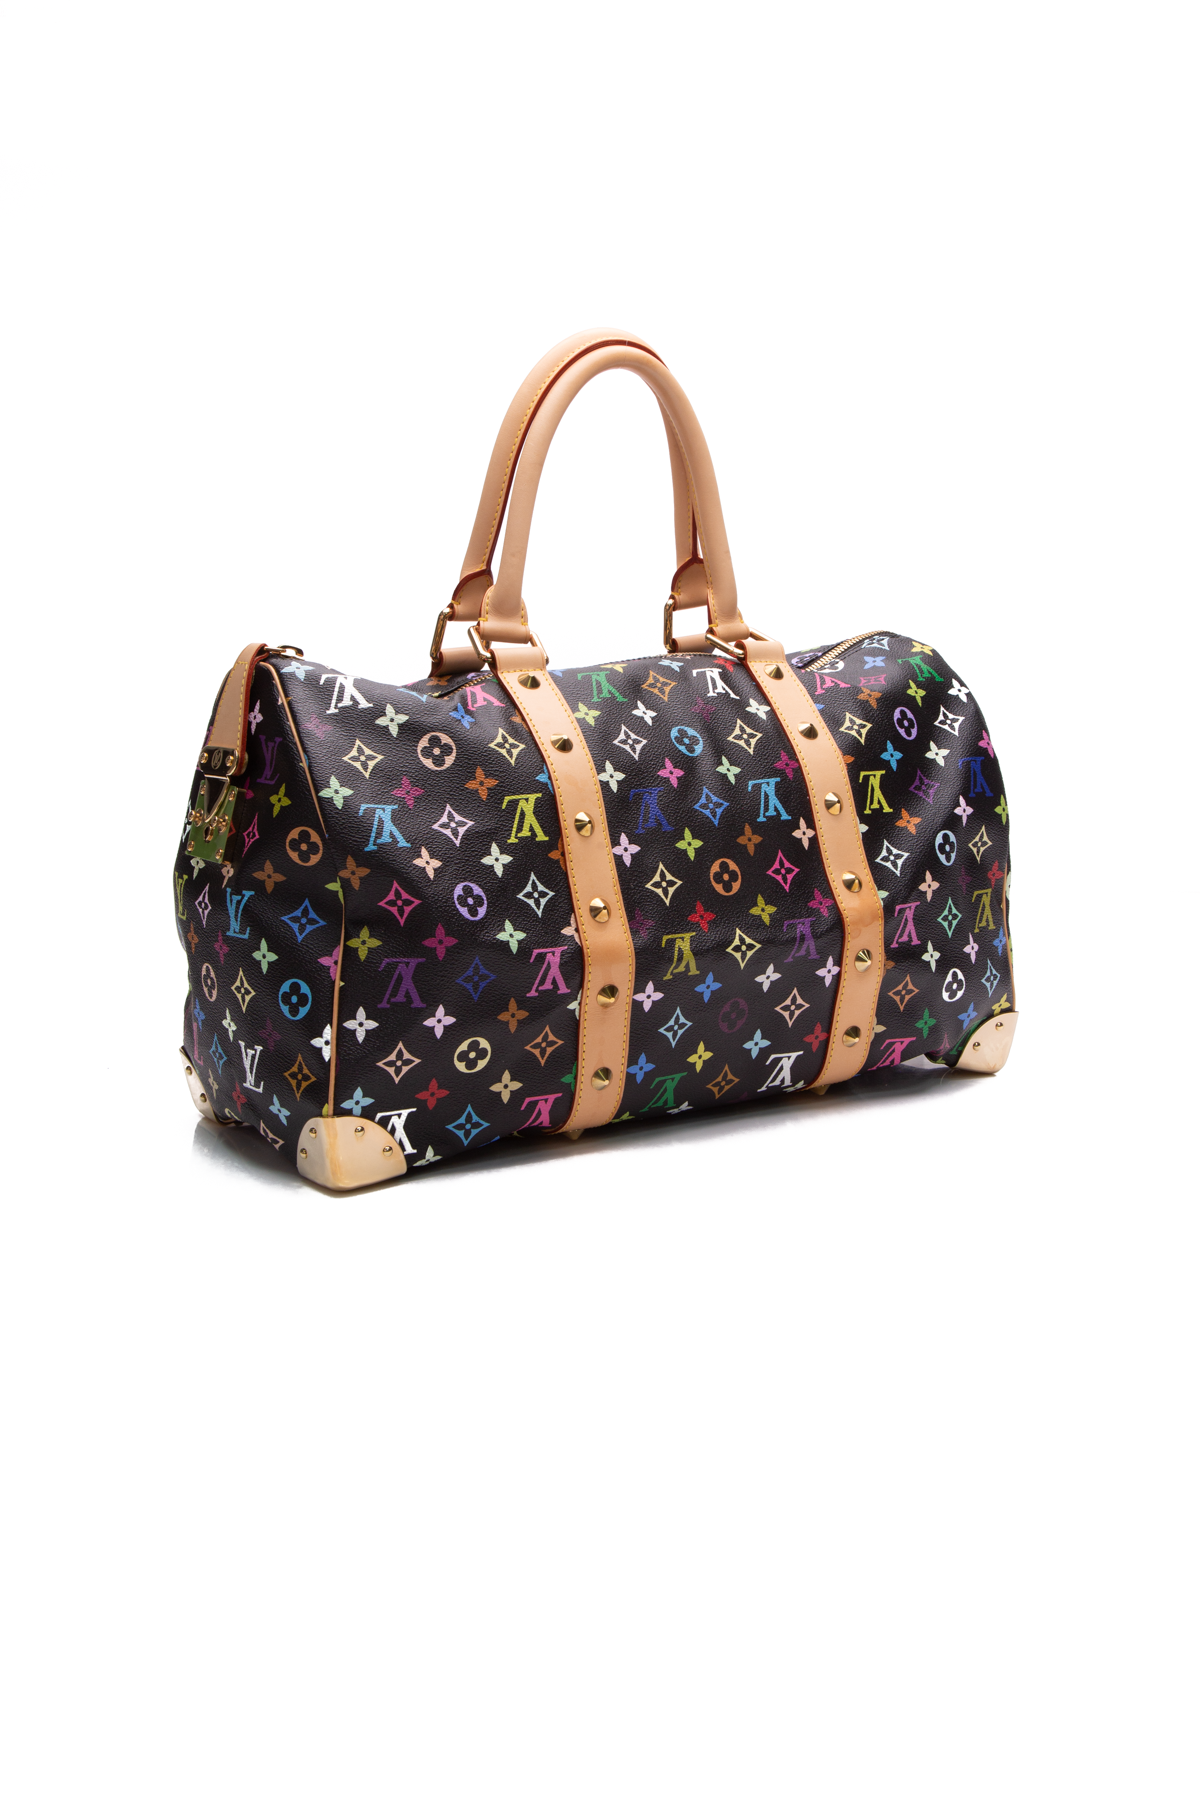 Louis Vuitton Keepall 45 Monogram Canvas Made In India